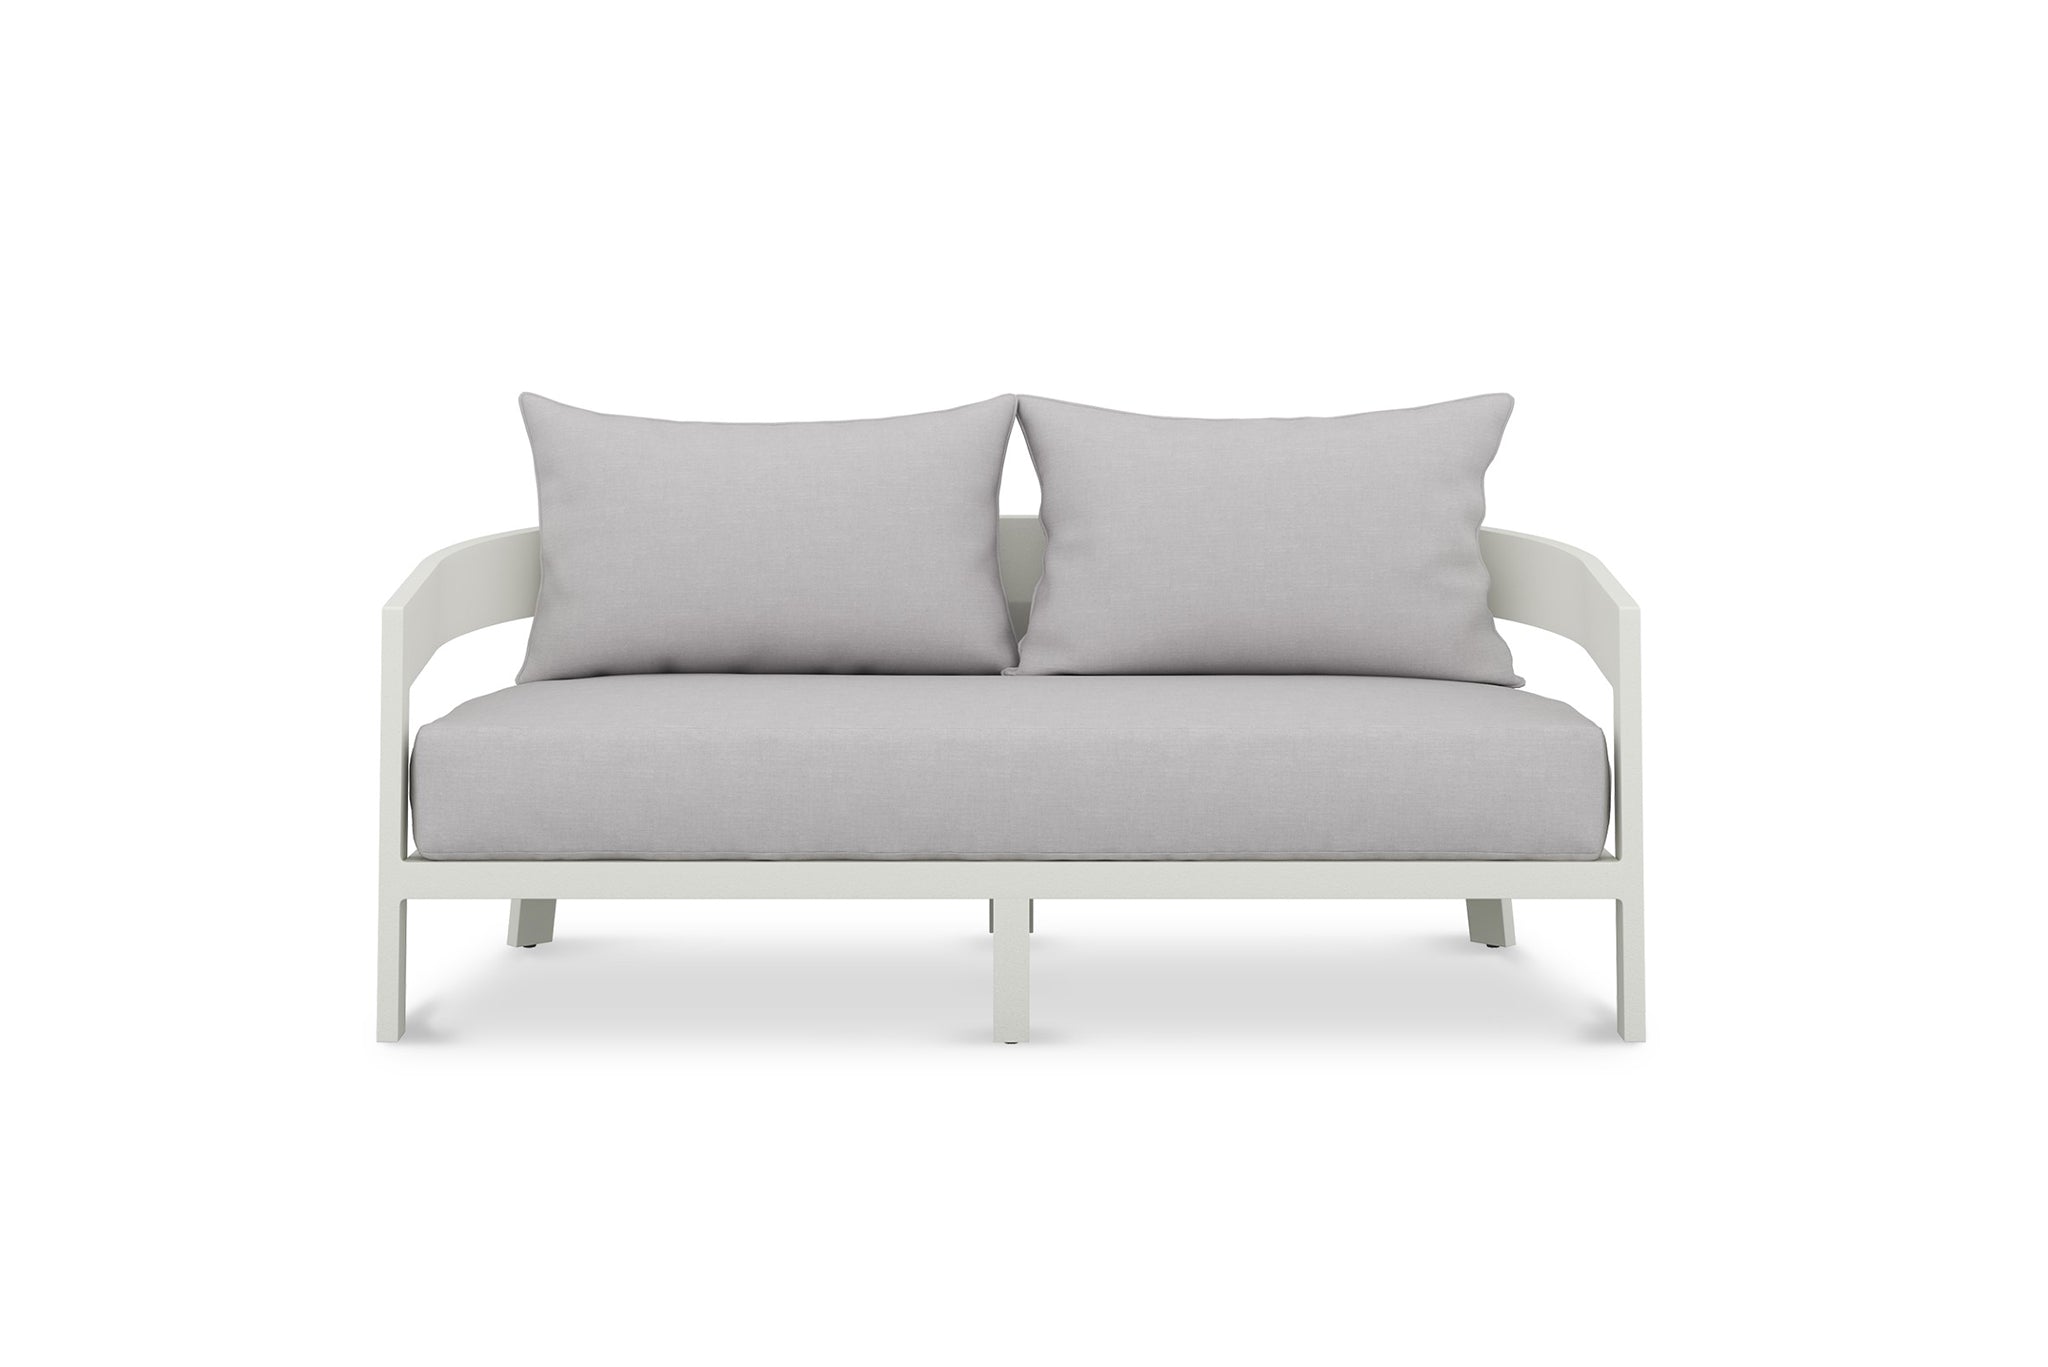 Queenscliff Outdoor Sofa – 2 Seater – White Powder Coated Frame